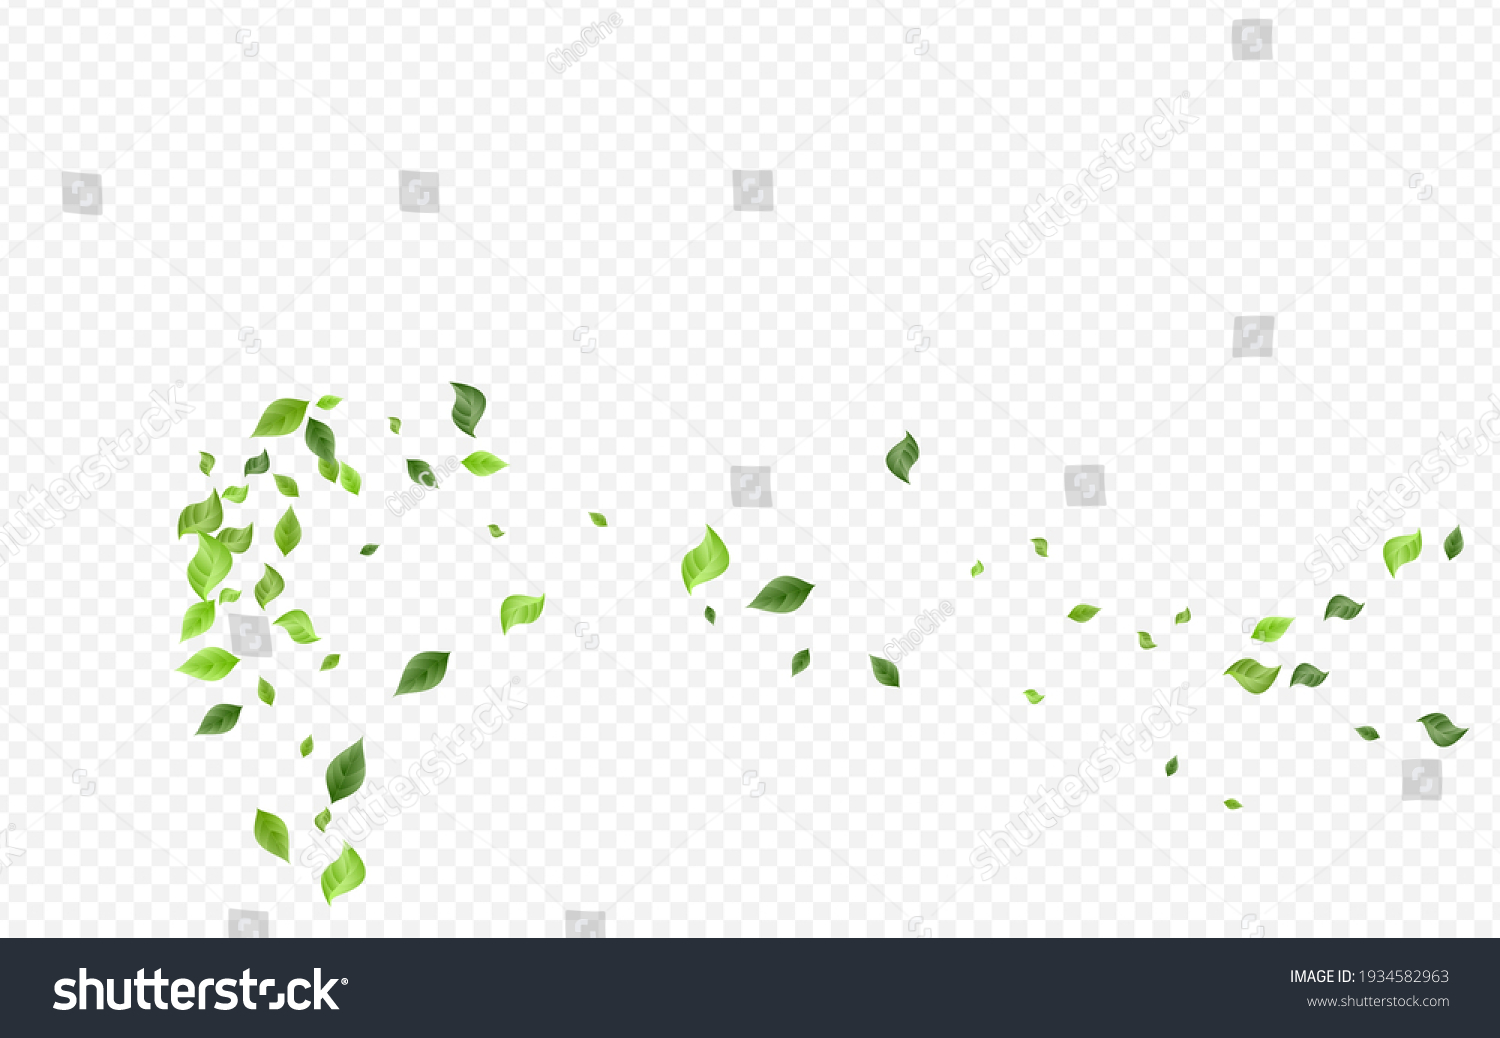 Grassy Leaf Herbal Vector Transparent Background Concept. Fresh Greenery Wallpaper. Forest Leaves Tree Border. Foliage Abstract Banner. #1934582963